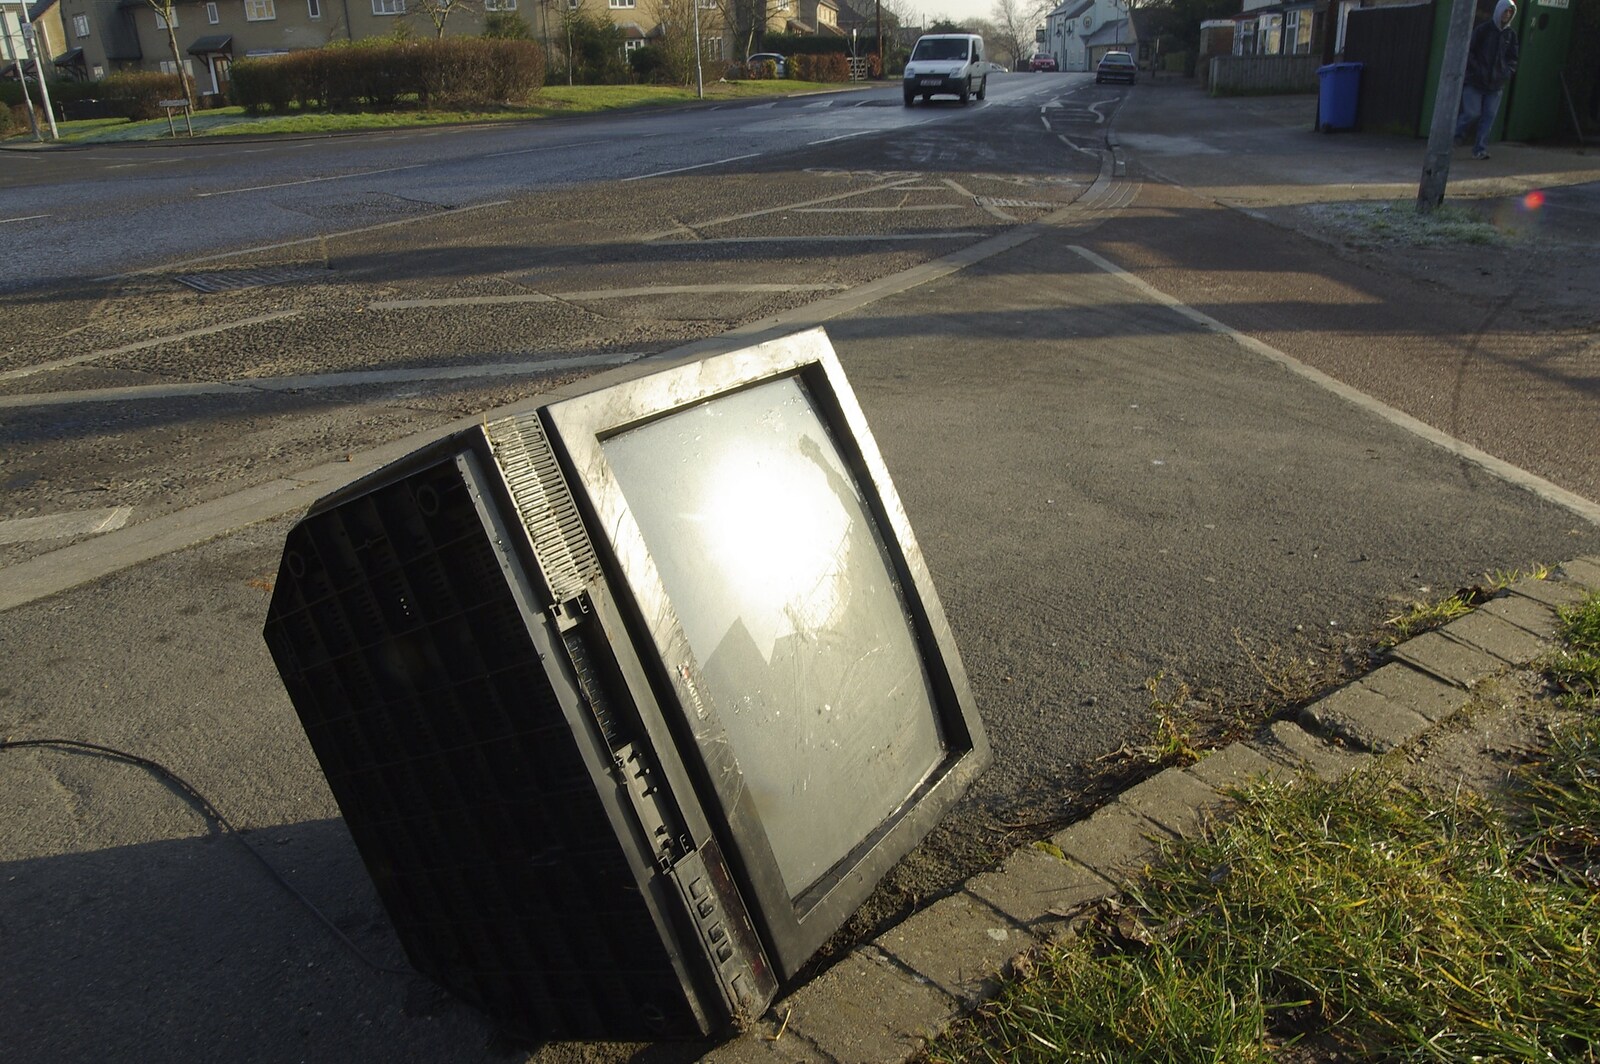 A television appears on Water Lane in Cambridge from Aldeburgh, Sprogs, and The BBs at Stoke by Nayland, Suffolk - 10th February 2008